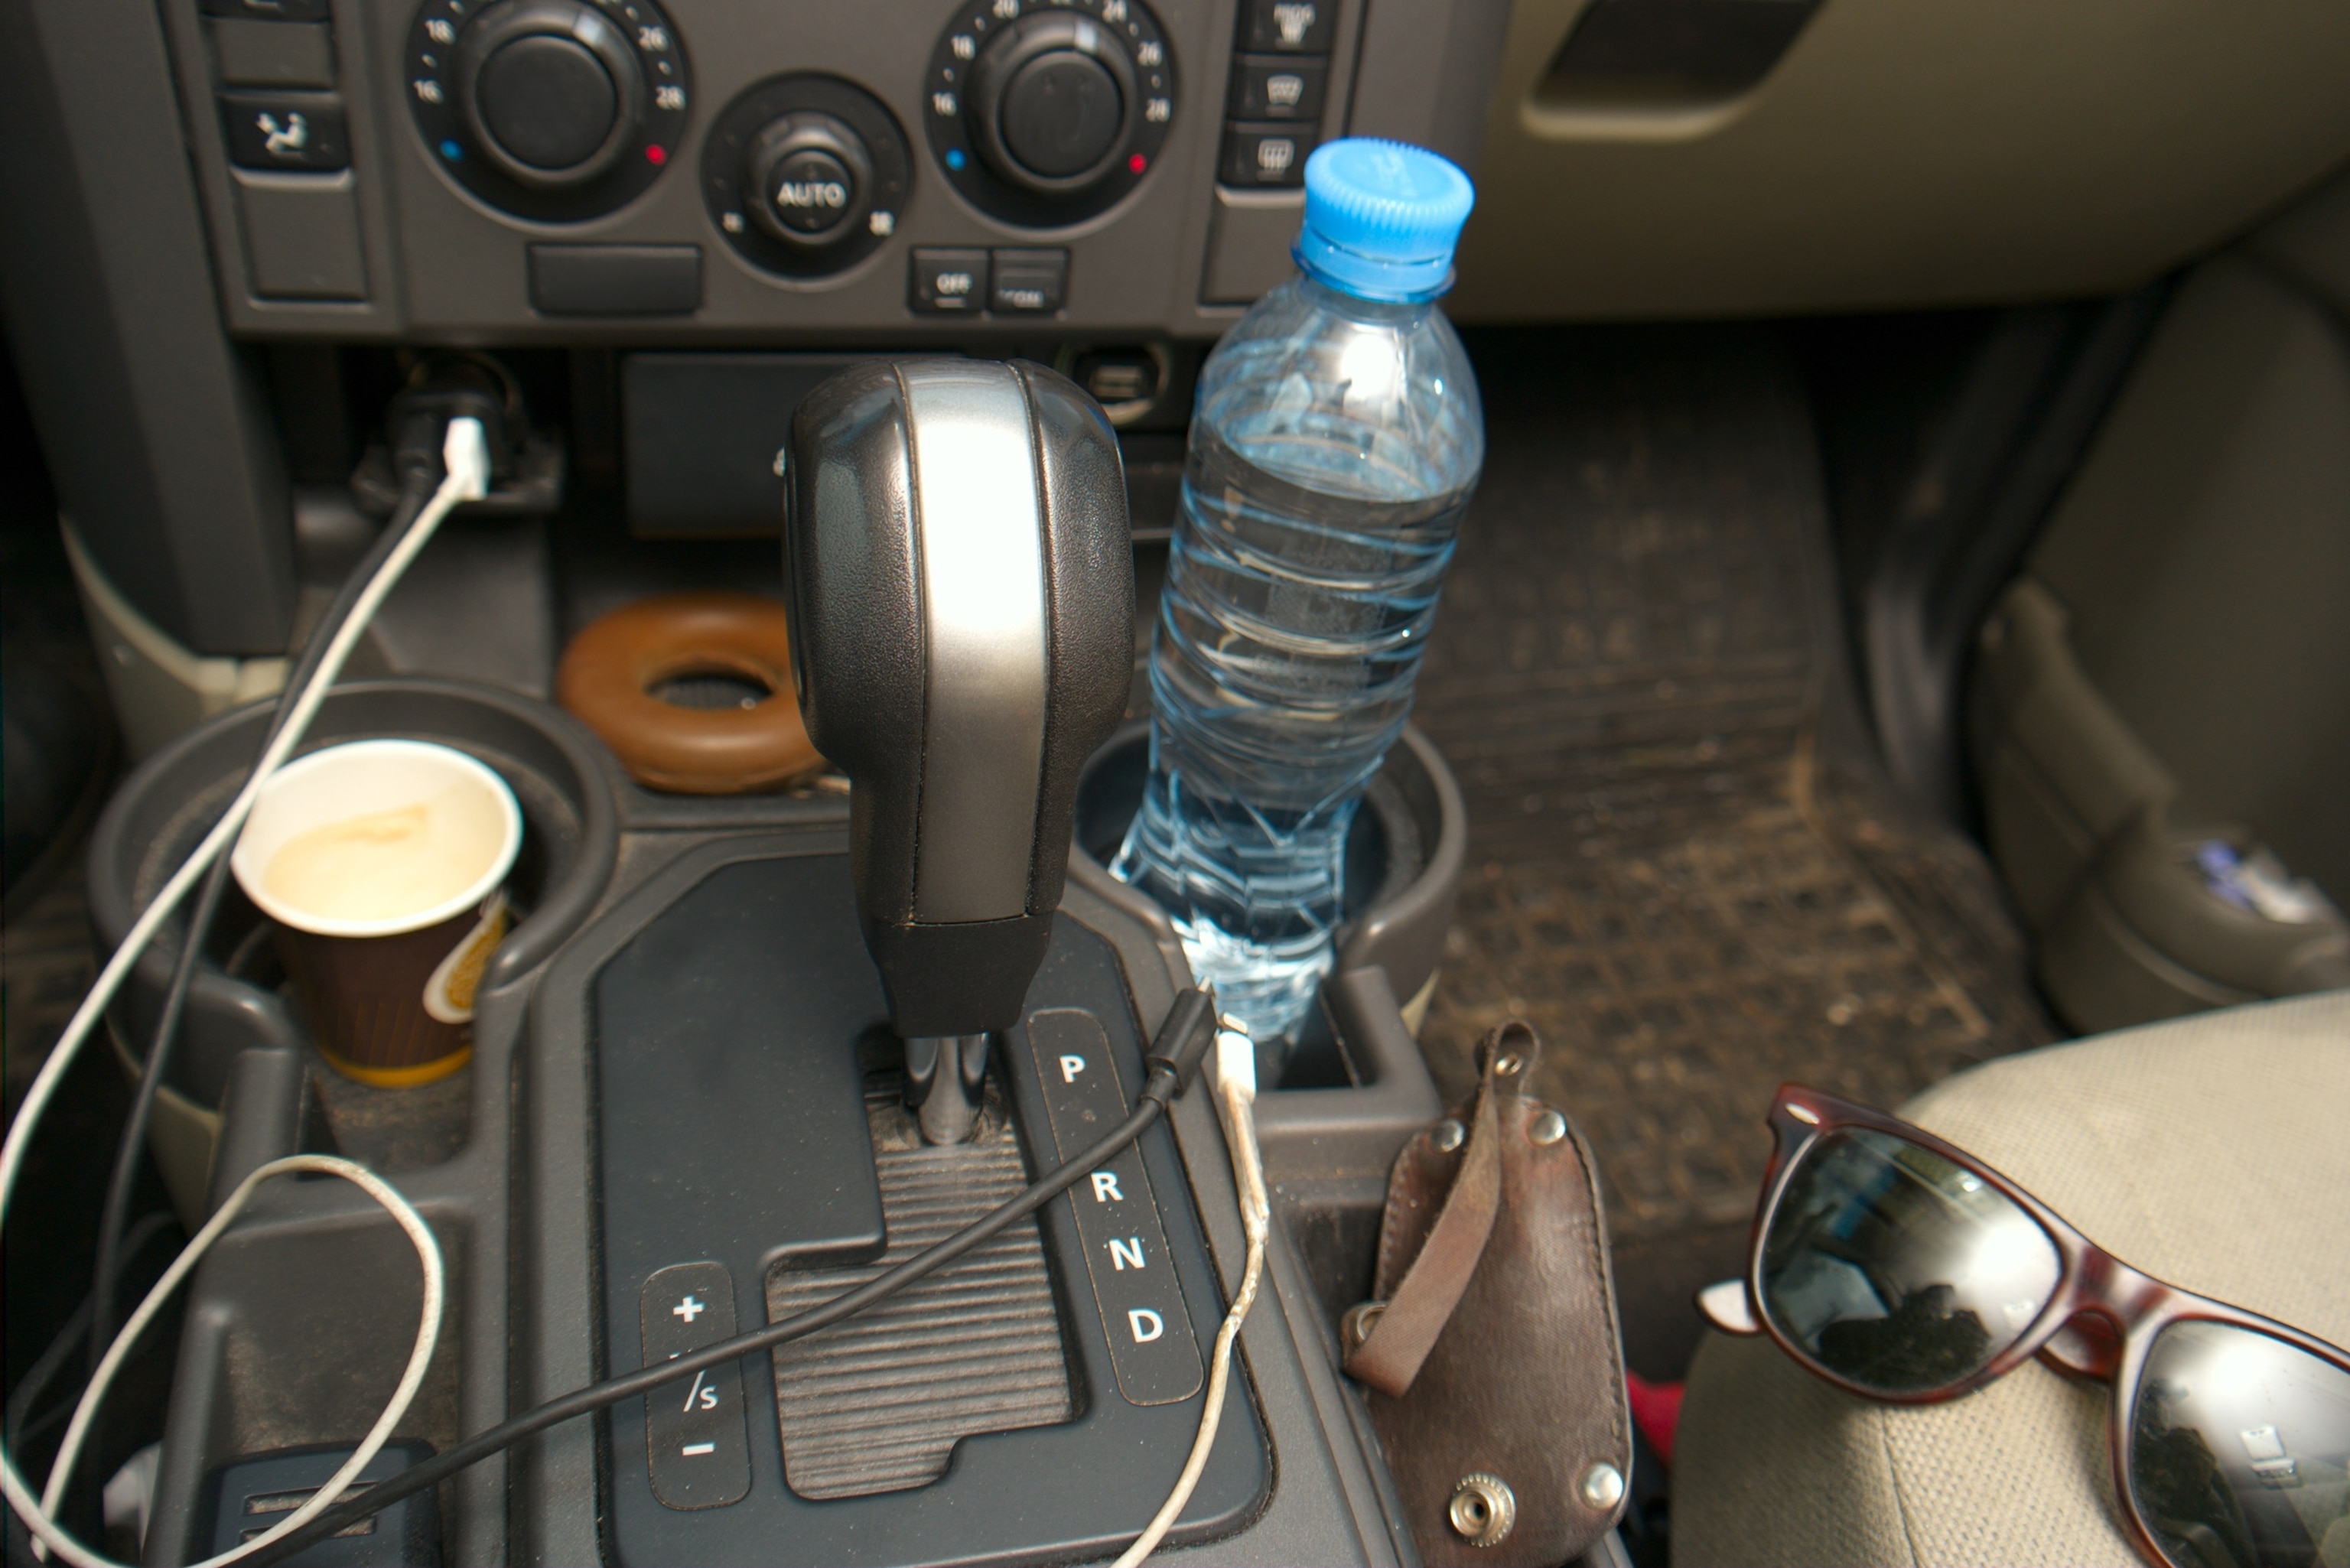 PHOTO: Items in a car.